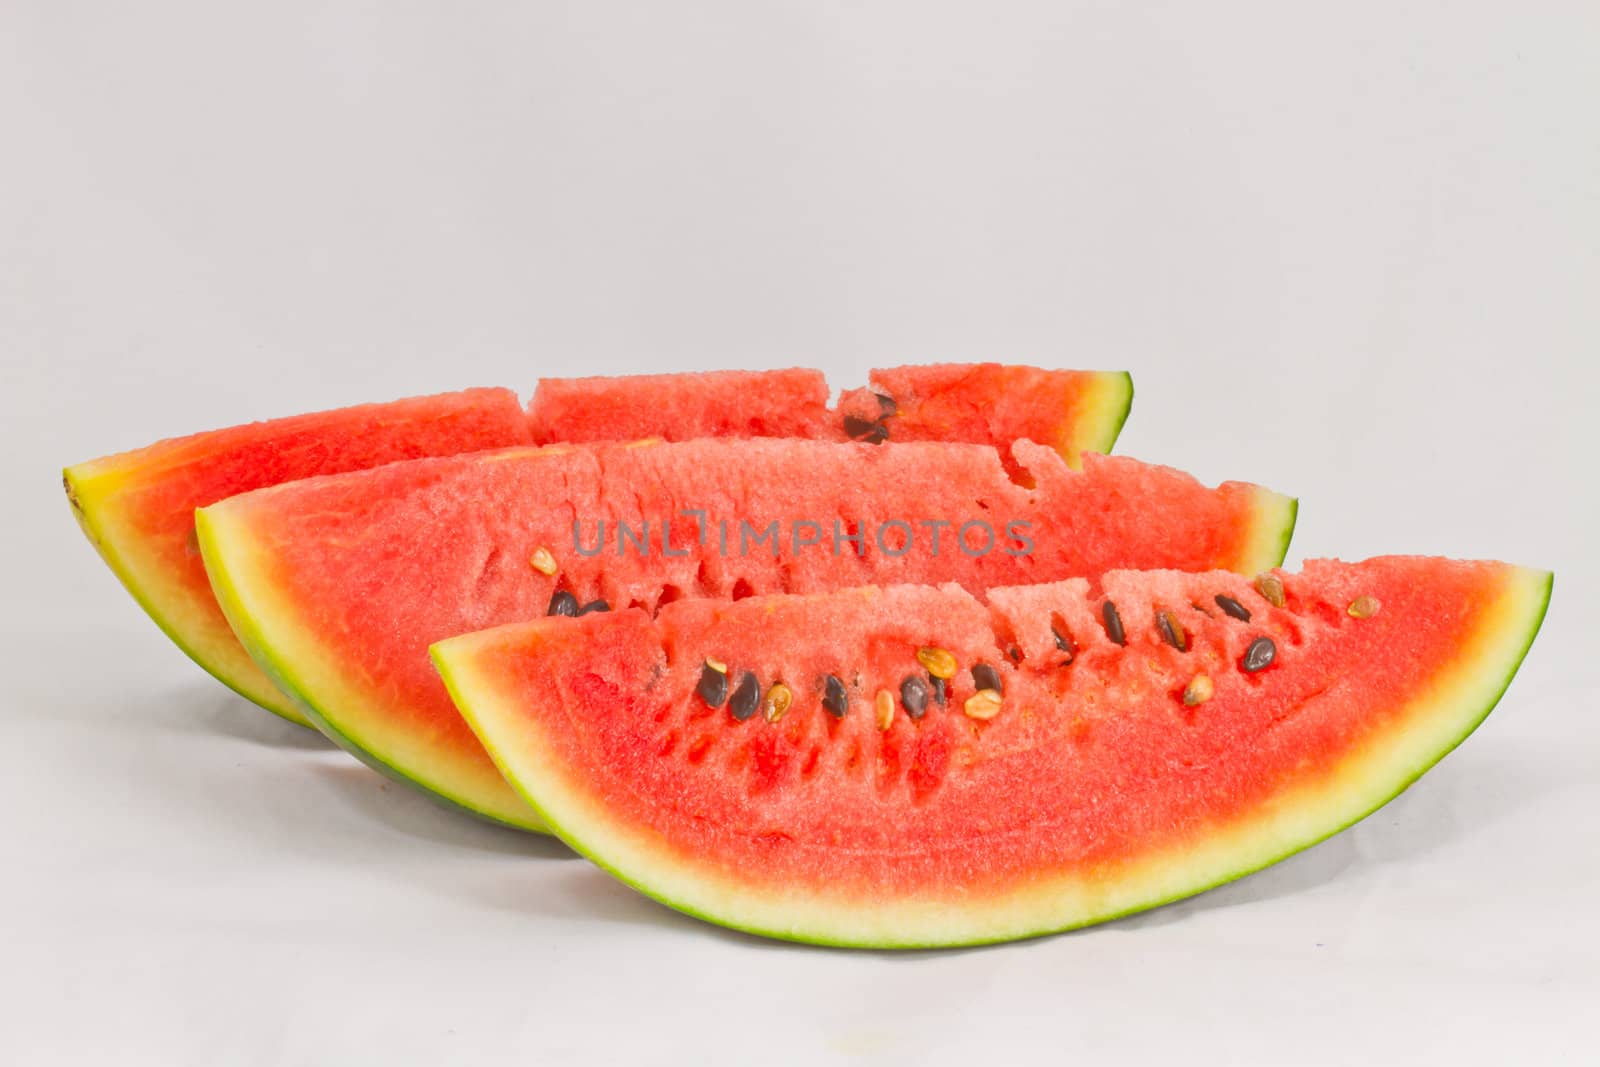 slice of watermelon, on white background by noombp